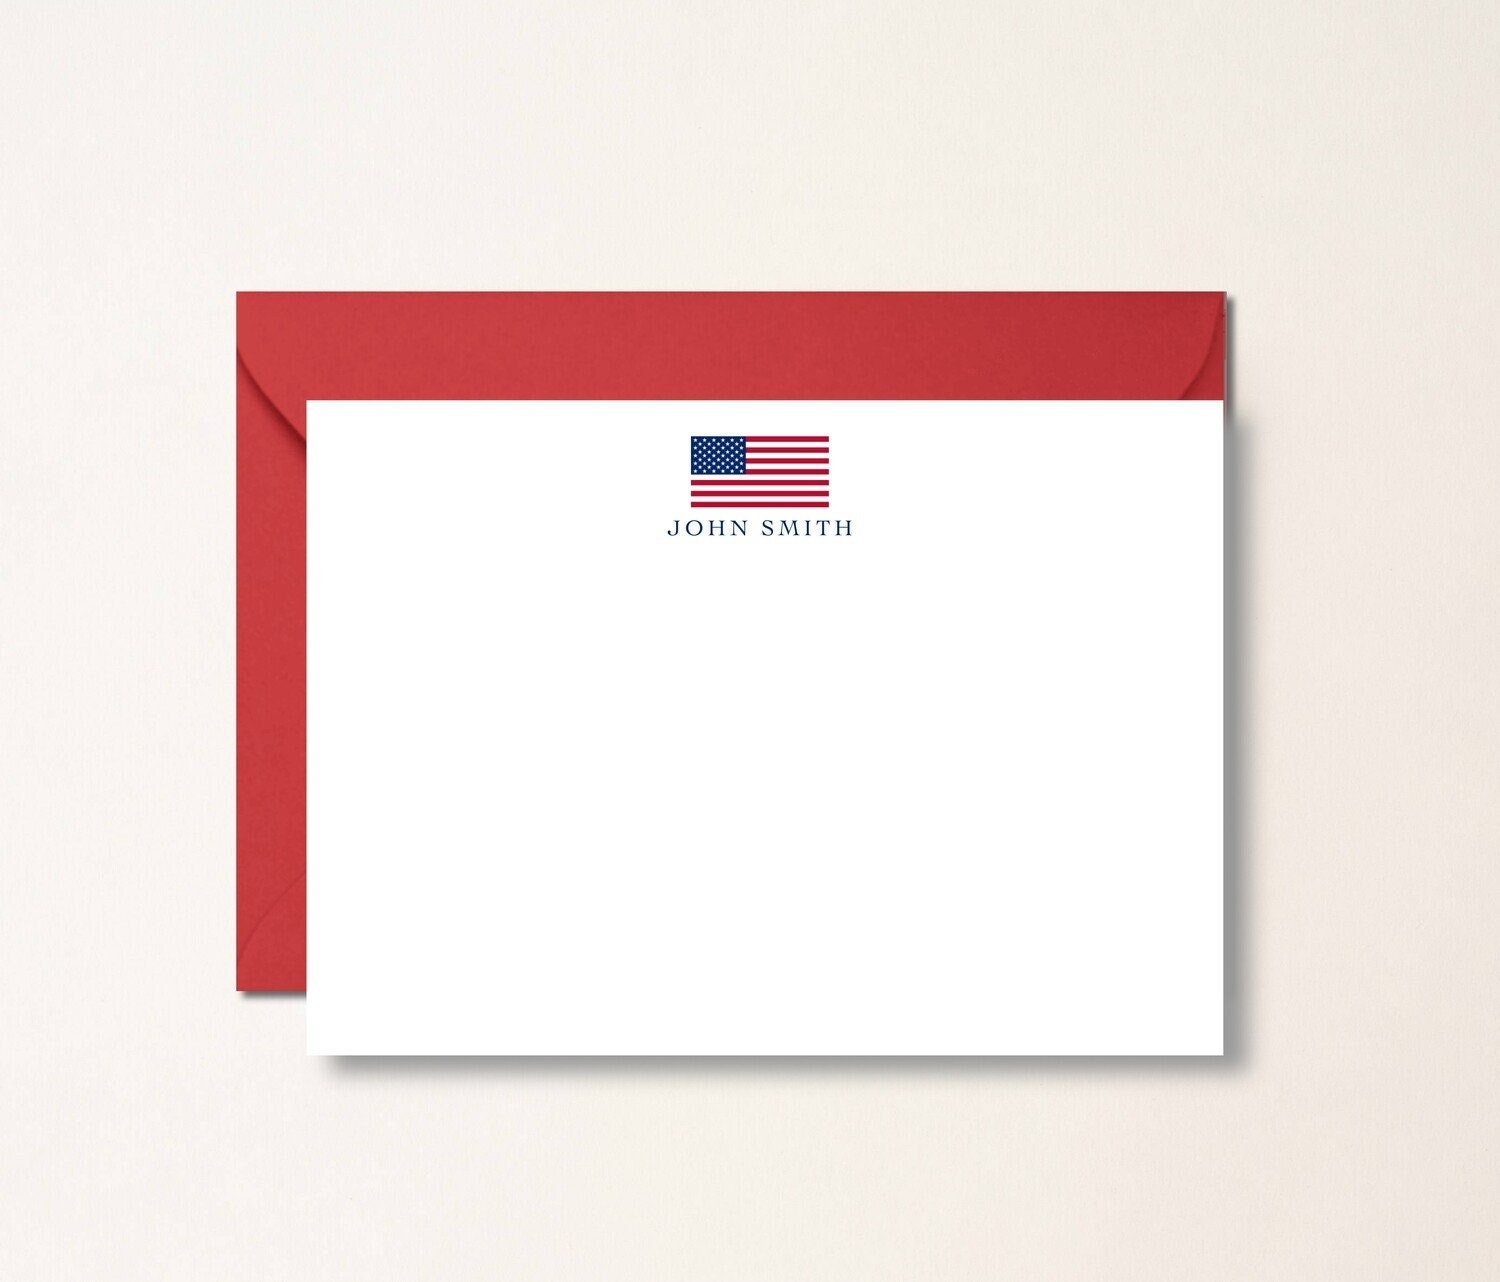  Personalized Army Note Cards, Mens Military Stationary Paper,  Custom Soldier Hero Thank You Cards, Your Choice of Quantity and Envelope  Color : Handmade Products